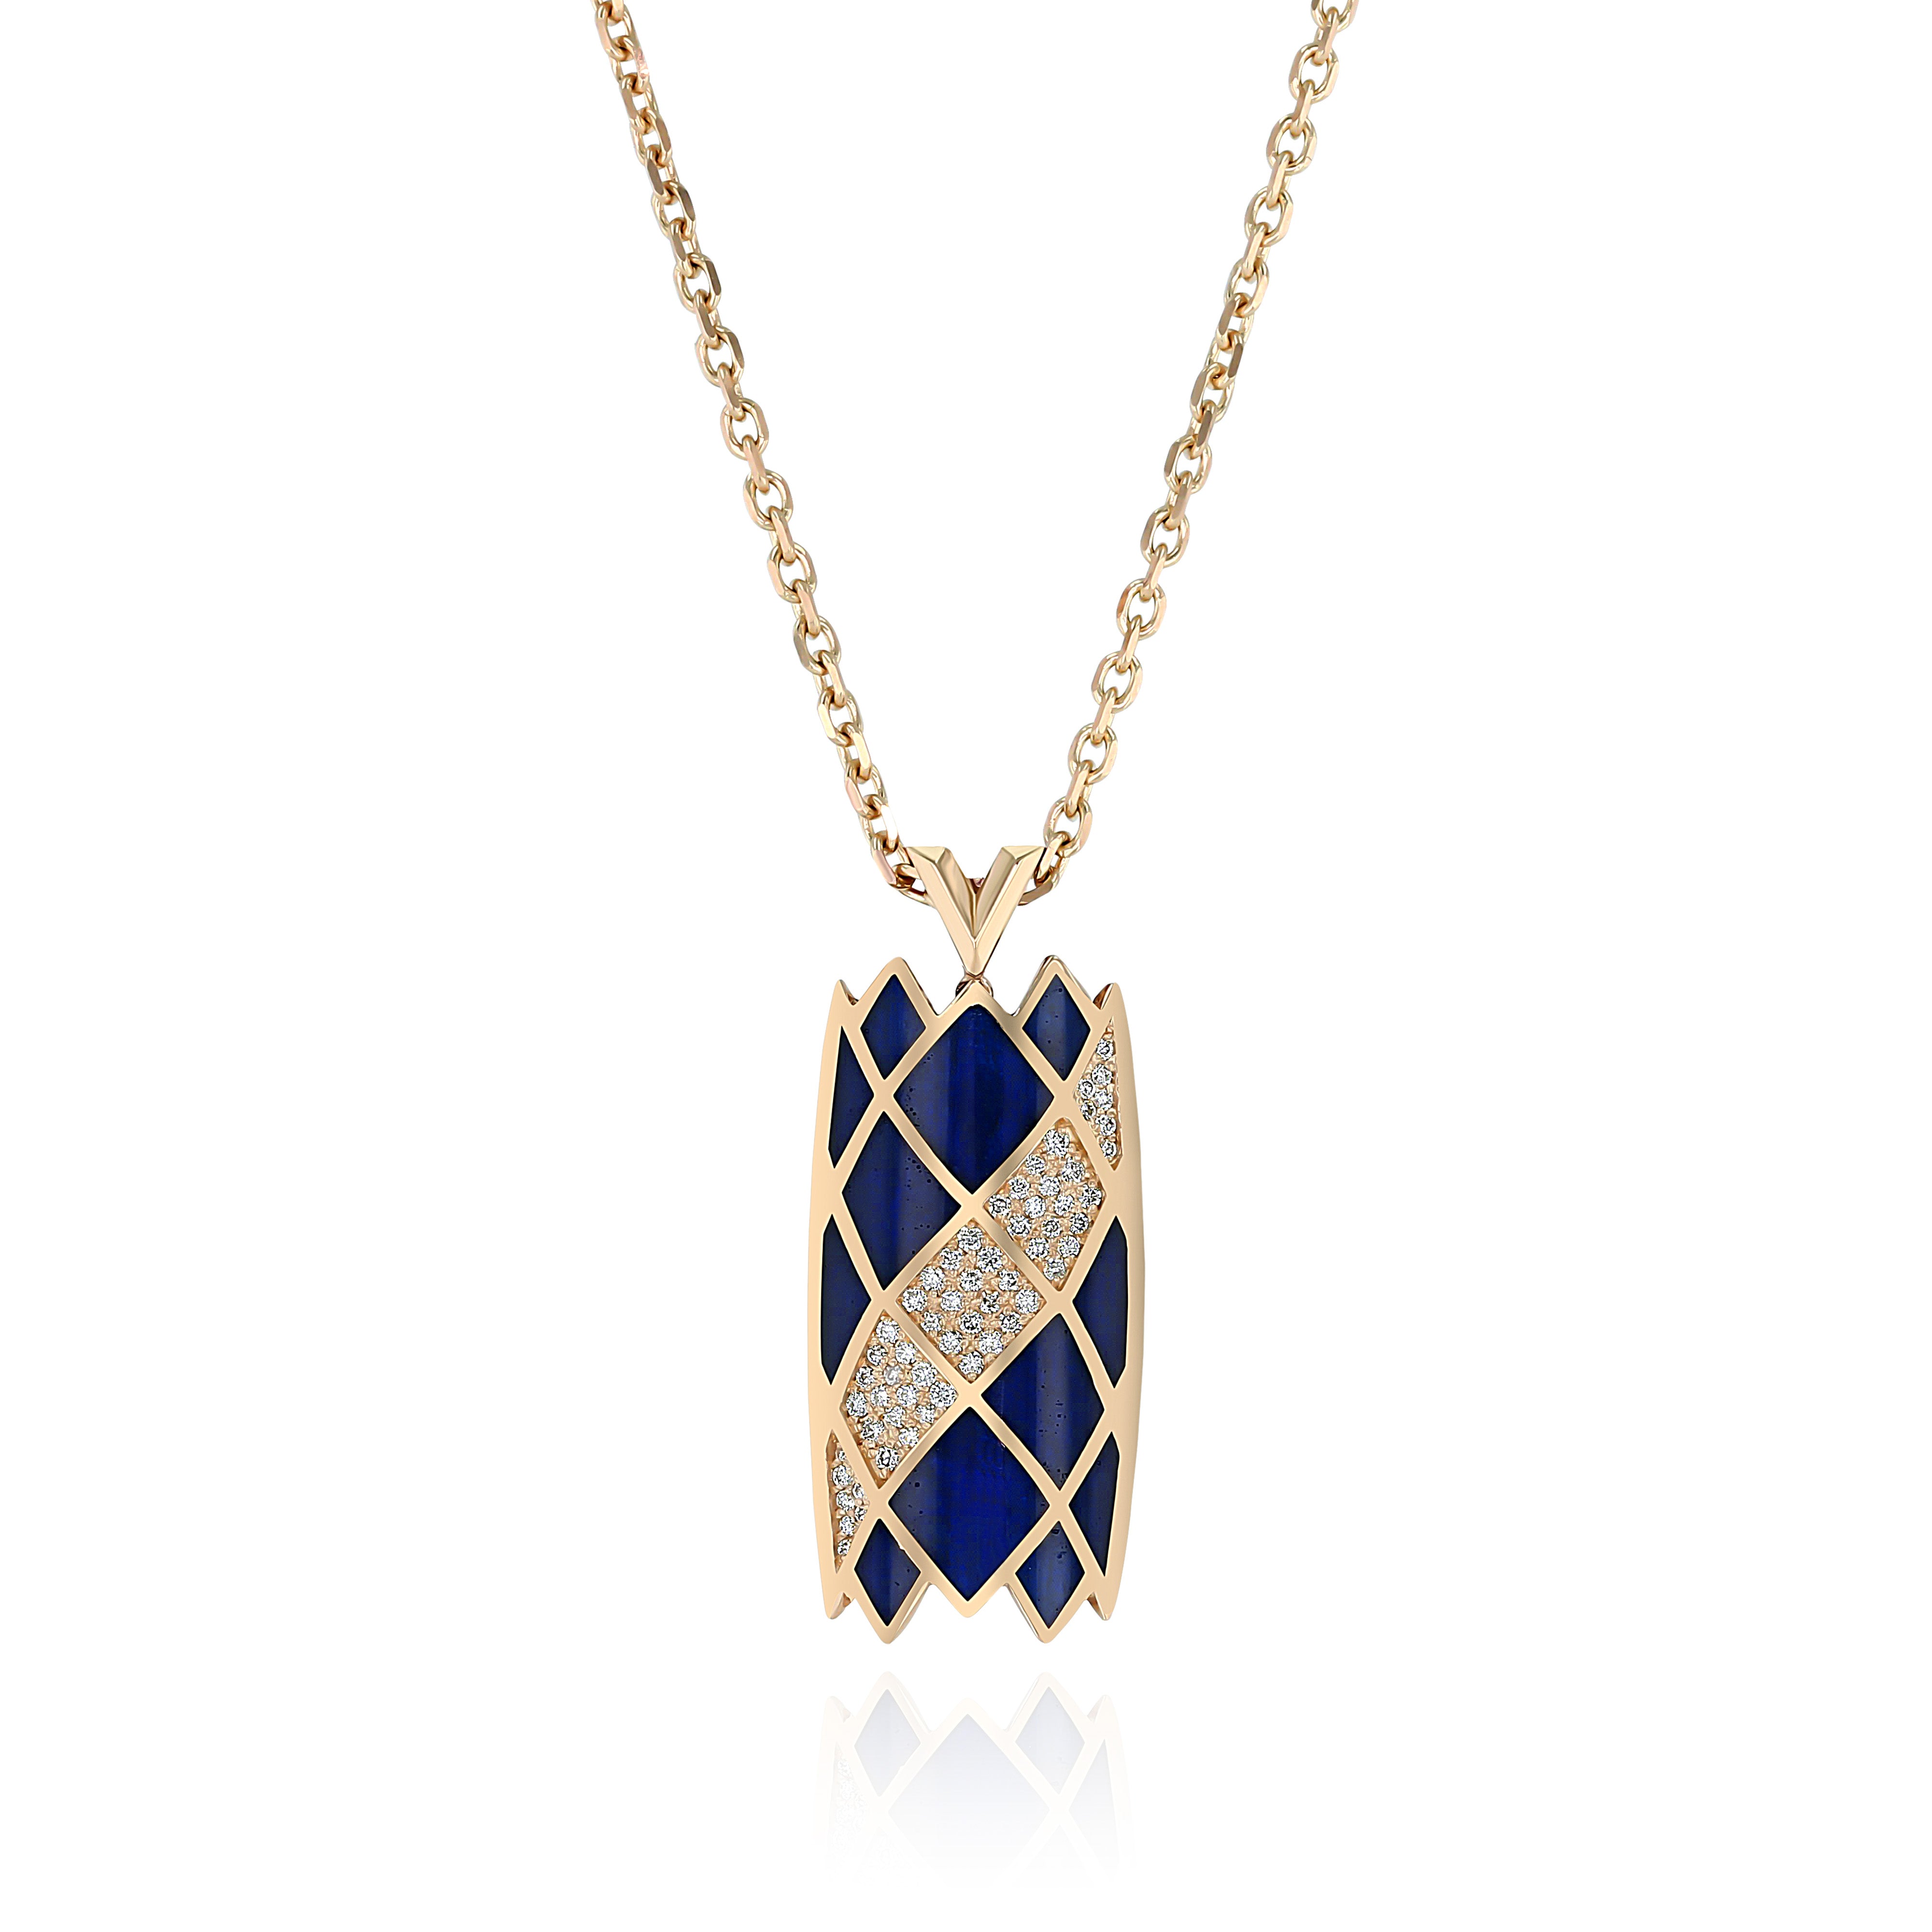 Yellow Gold Necklace with patterned Dark Blue Cloisonne and small round Diamonds, Medium